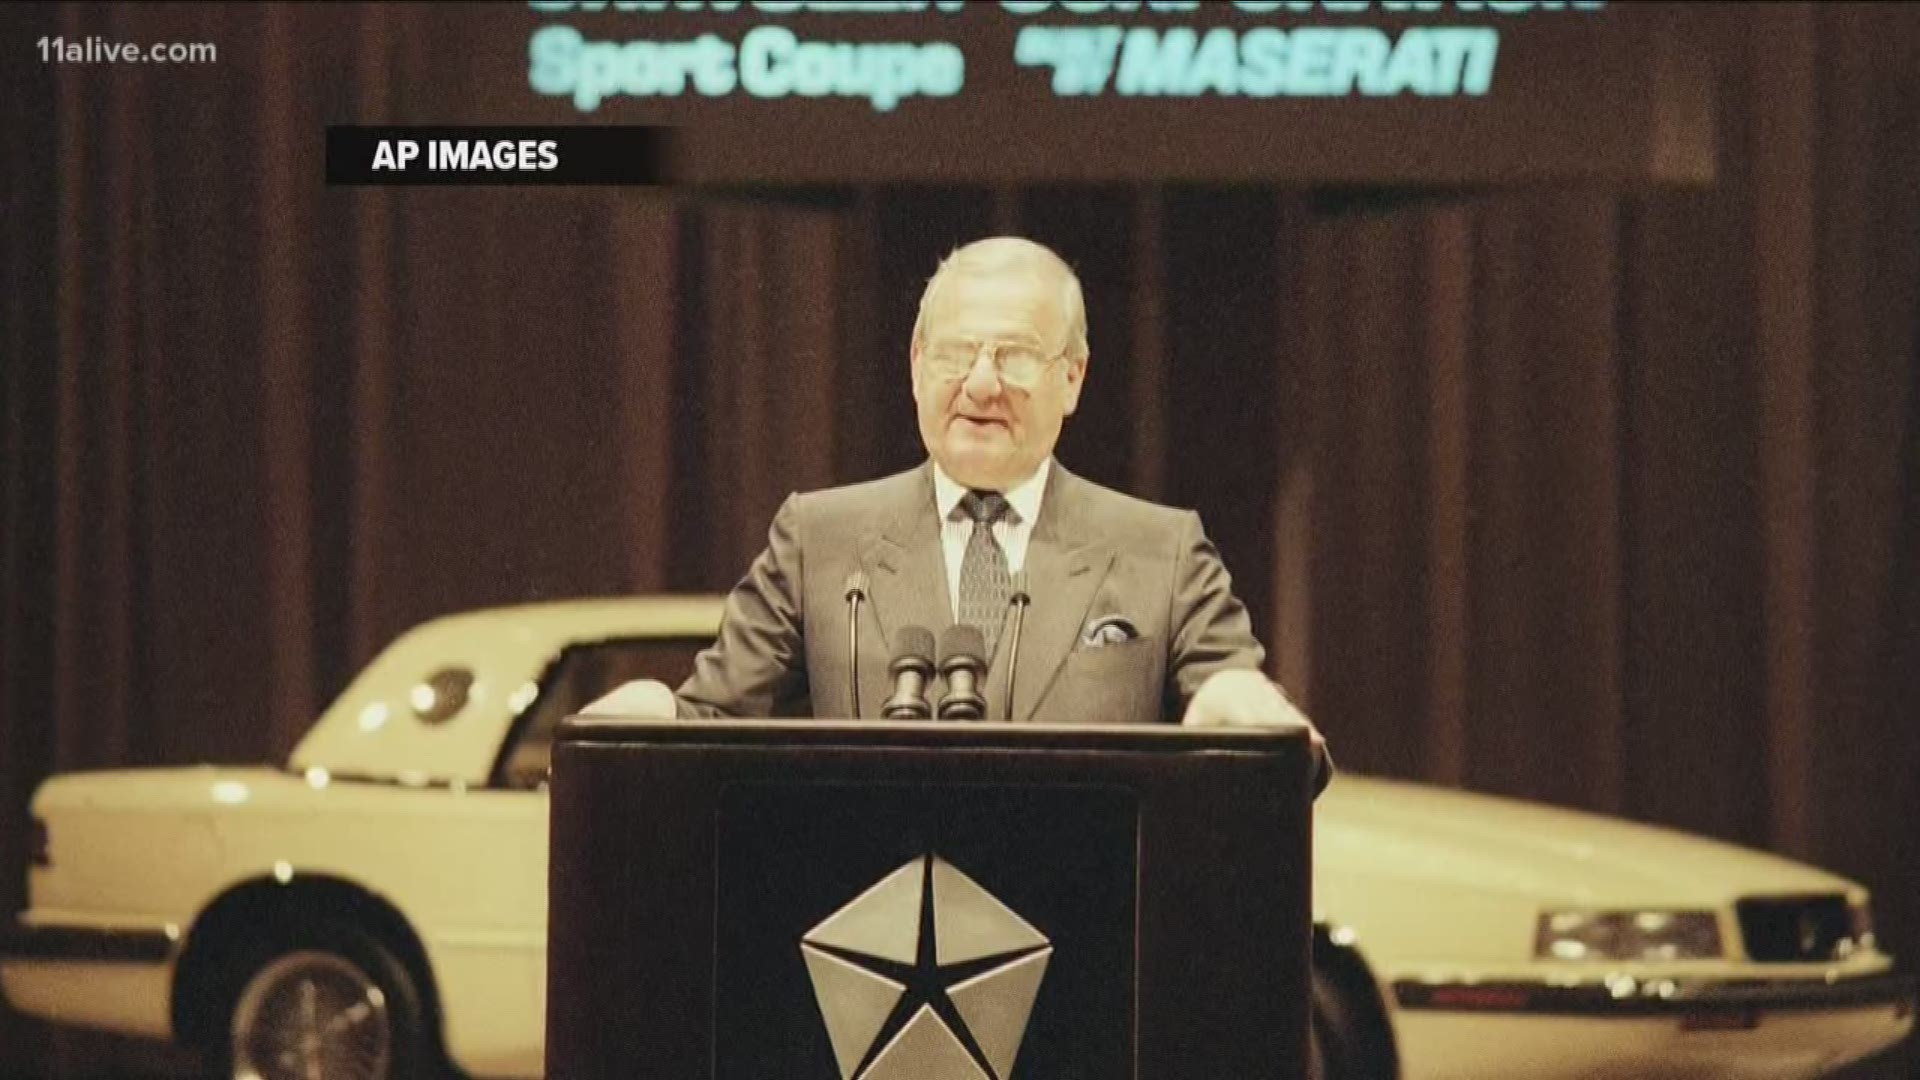 Lee Iacocca, who’s been credited with saving Chrysler from bankruptcy in the 1980s, has died, his daughter confirmed to The Washington Post. He was 94.